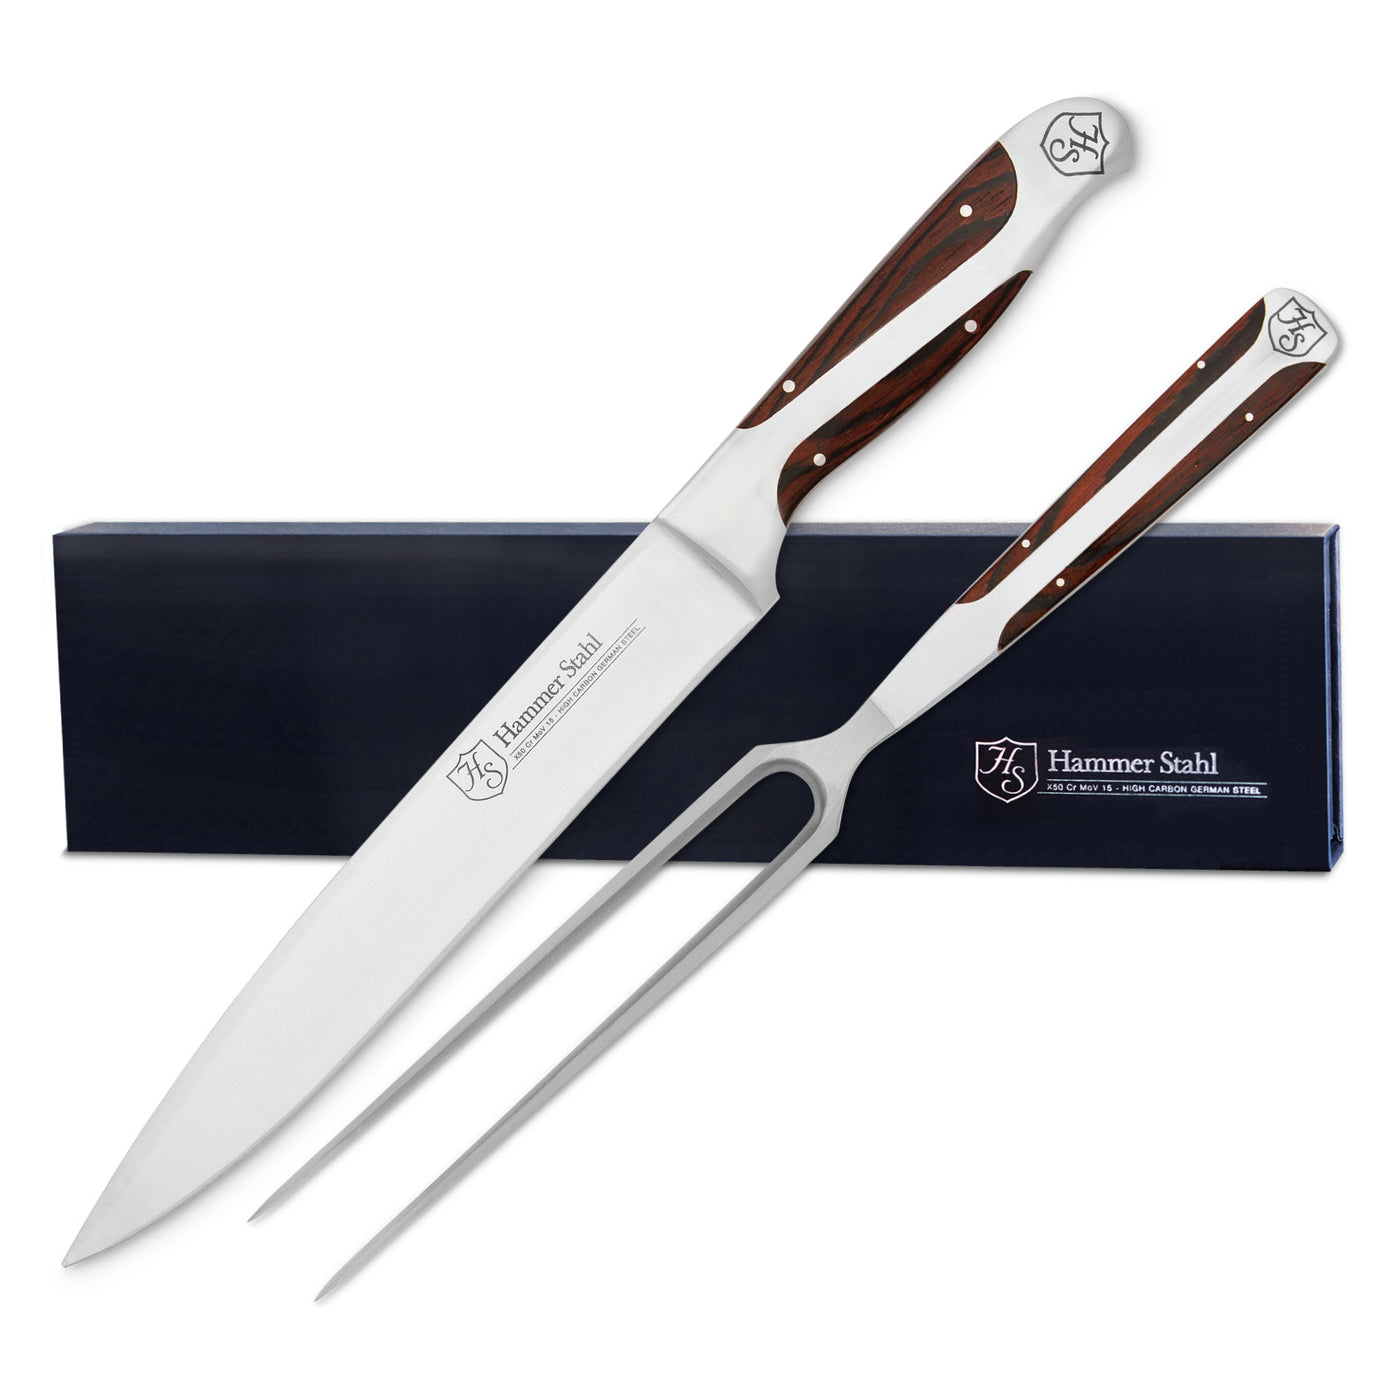 HexClad Carving Knife and Fork Set, 10-Inch, Japanese Damascus Stainless  Steel Blade Knife with Full Tang Construction and 2-Pronged Fork, Pakkawood